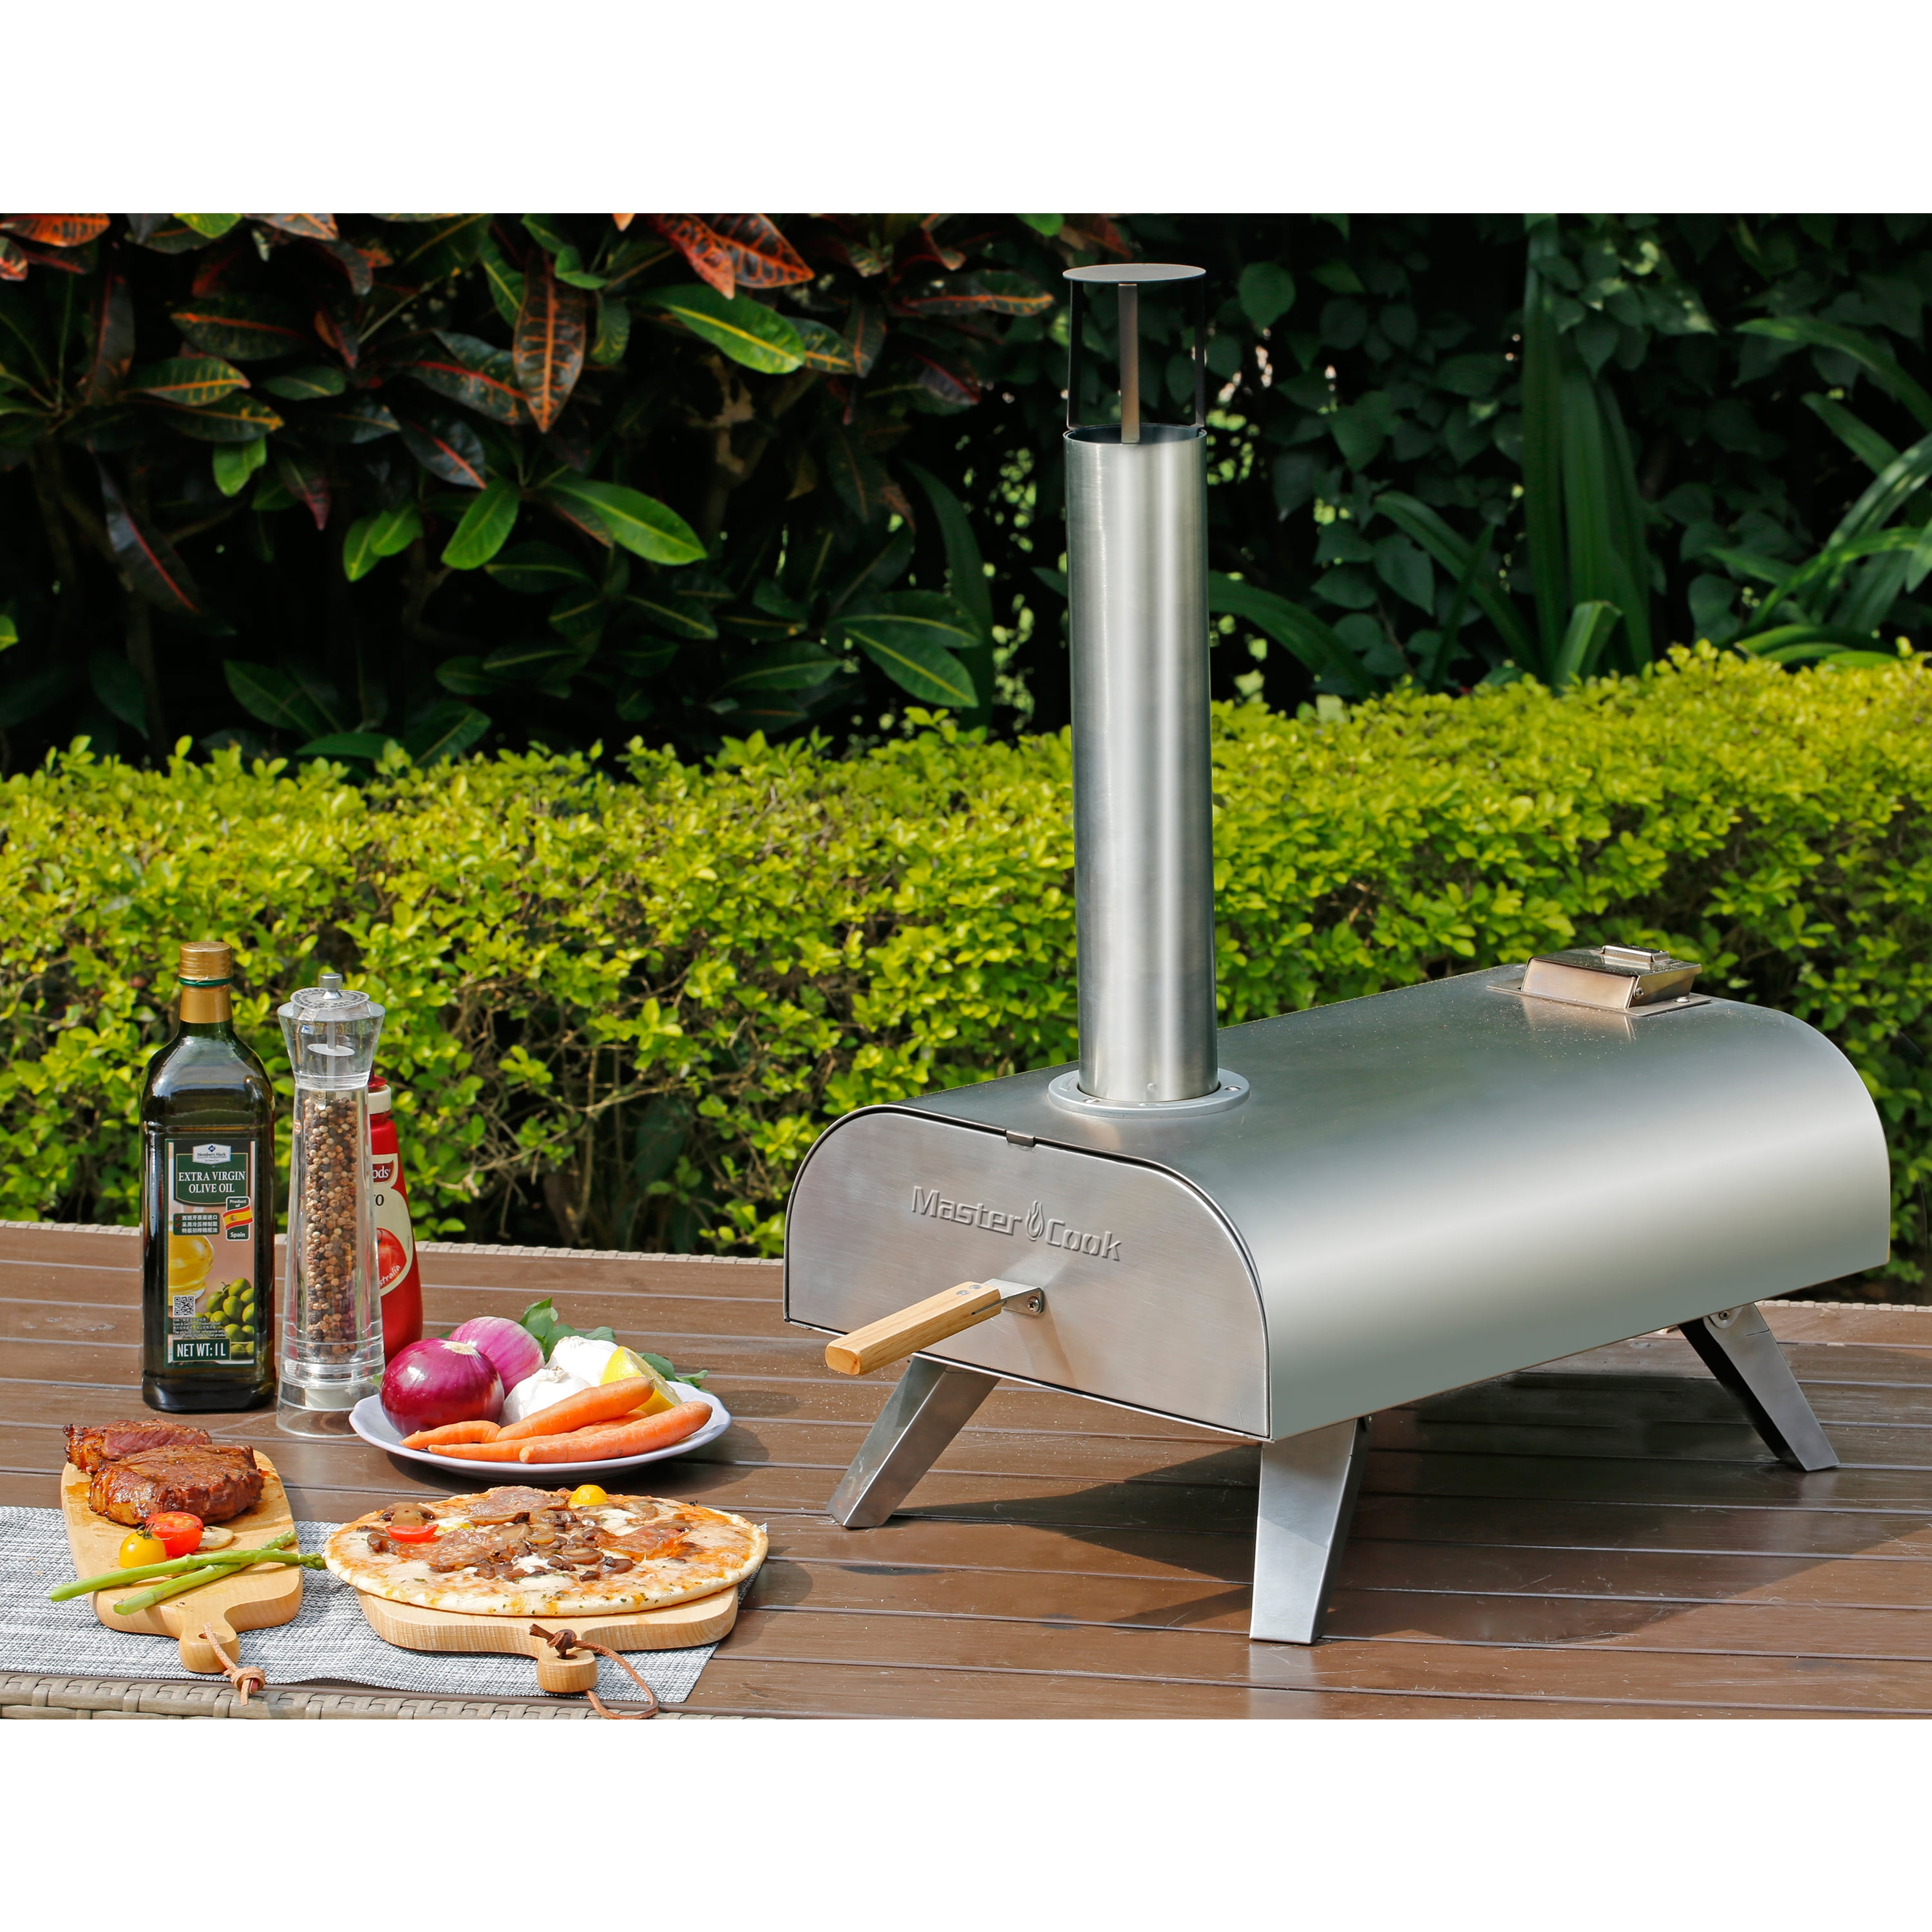 VEVORbrand 12 Wood Fired Pizza Oven, Outdoor Stainless Steel Pizza Oven  with Accessories 